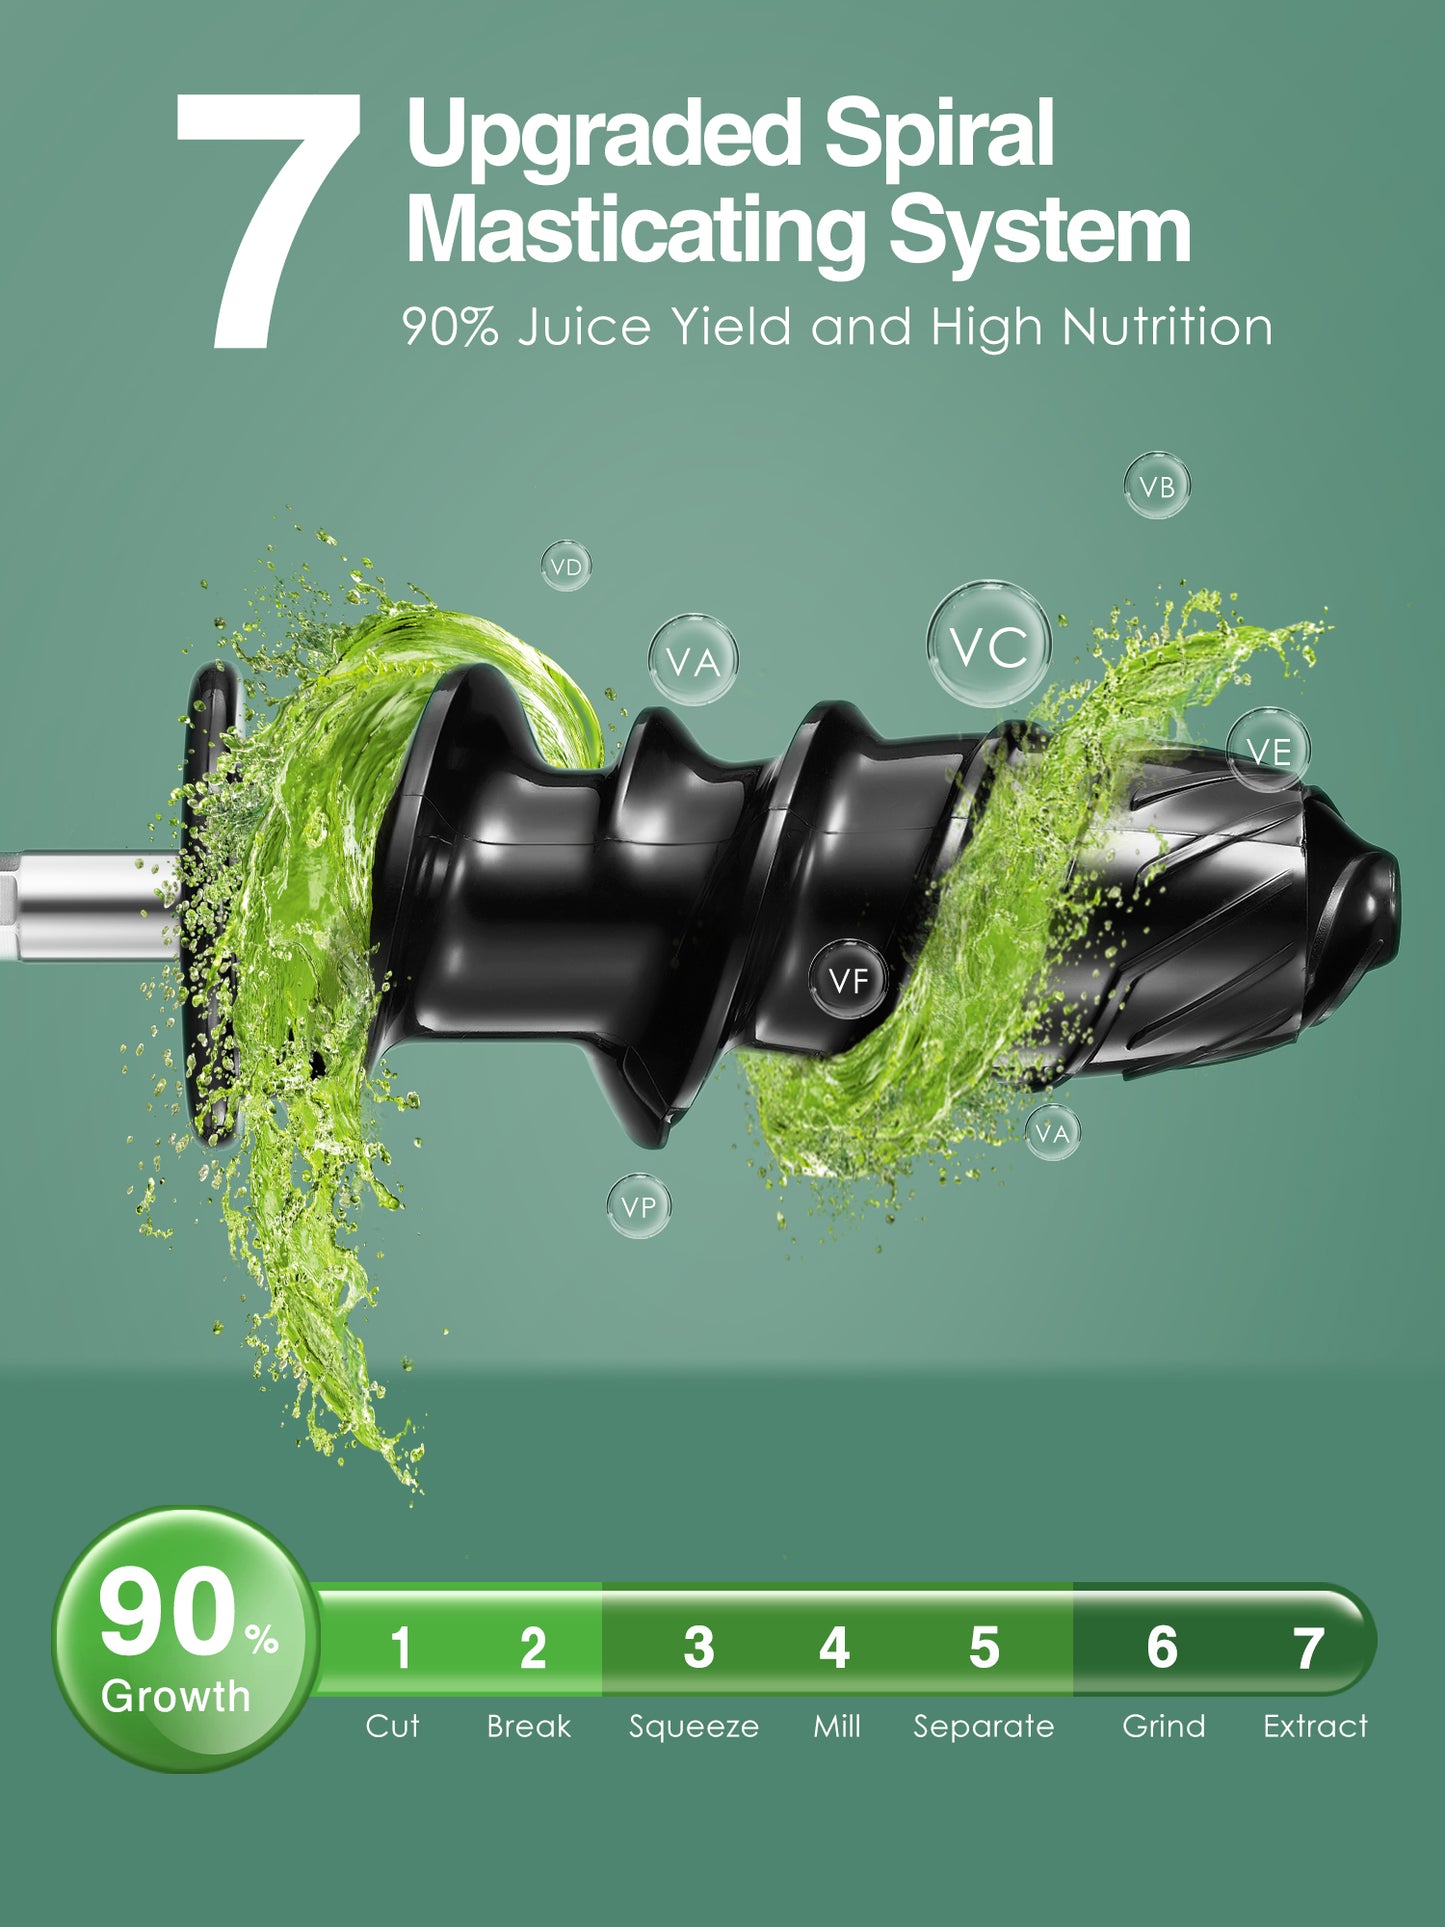 7 upgraded spiral masticating system, 90% juice yield and high nutrition